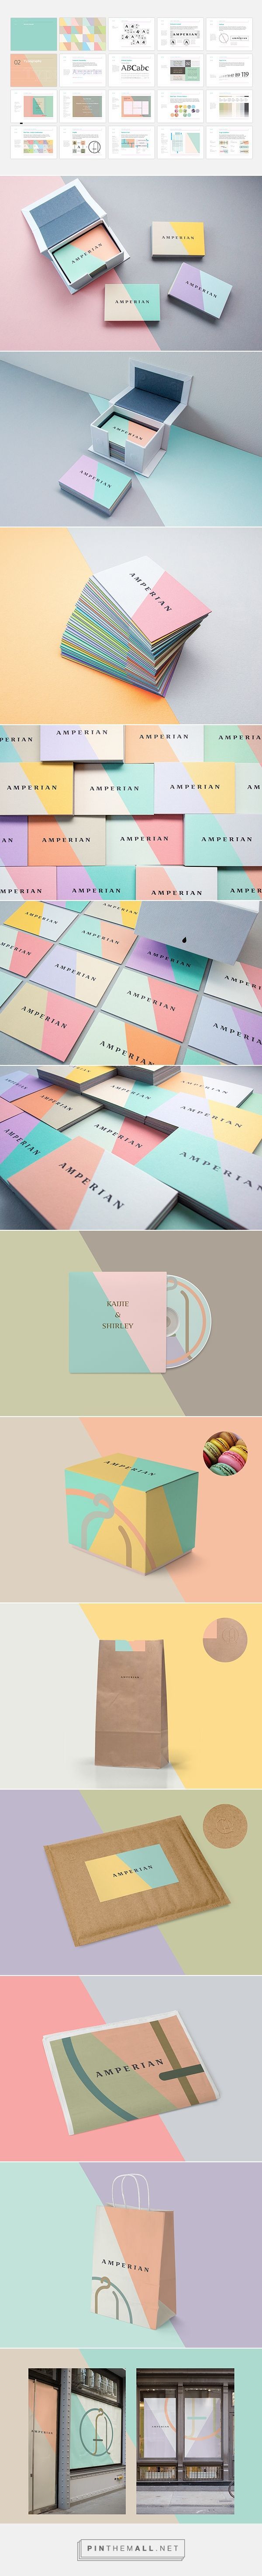 Color blocking #stationery design. Love the business cards and packaging especially.